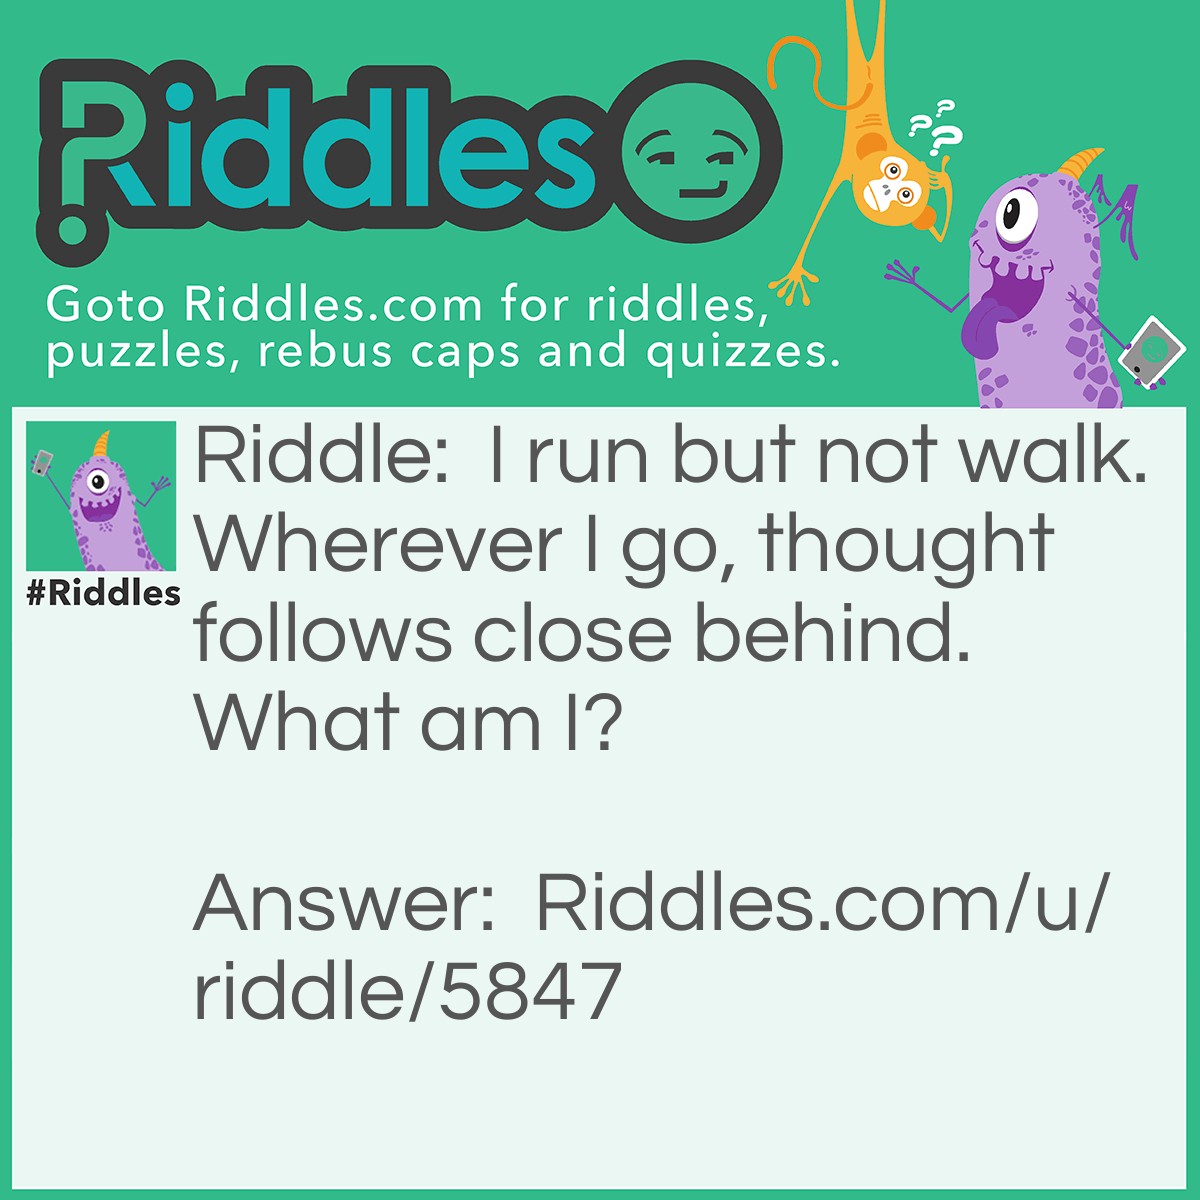 Riddle: I run but not walk. Wherever I go, thought follows close behind. What am I? Answer: Your nose. It runs. And your brain is right behind it.